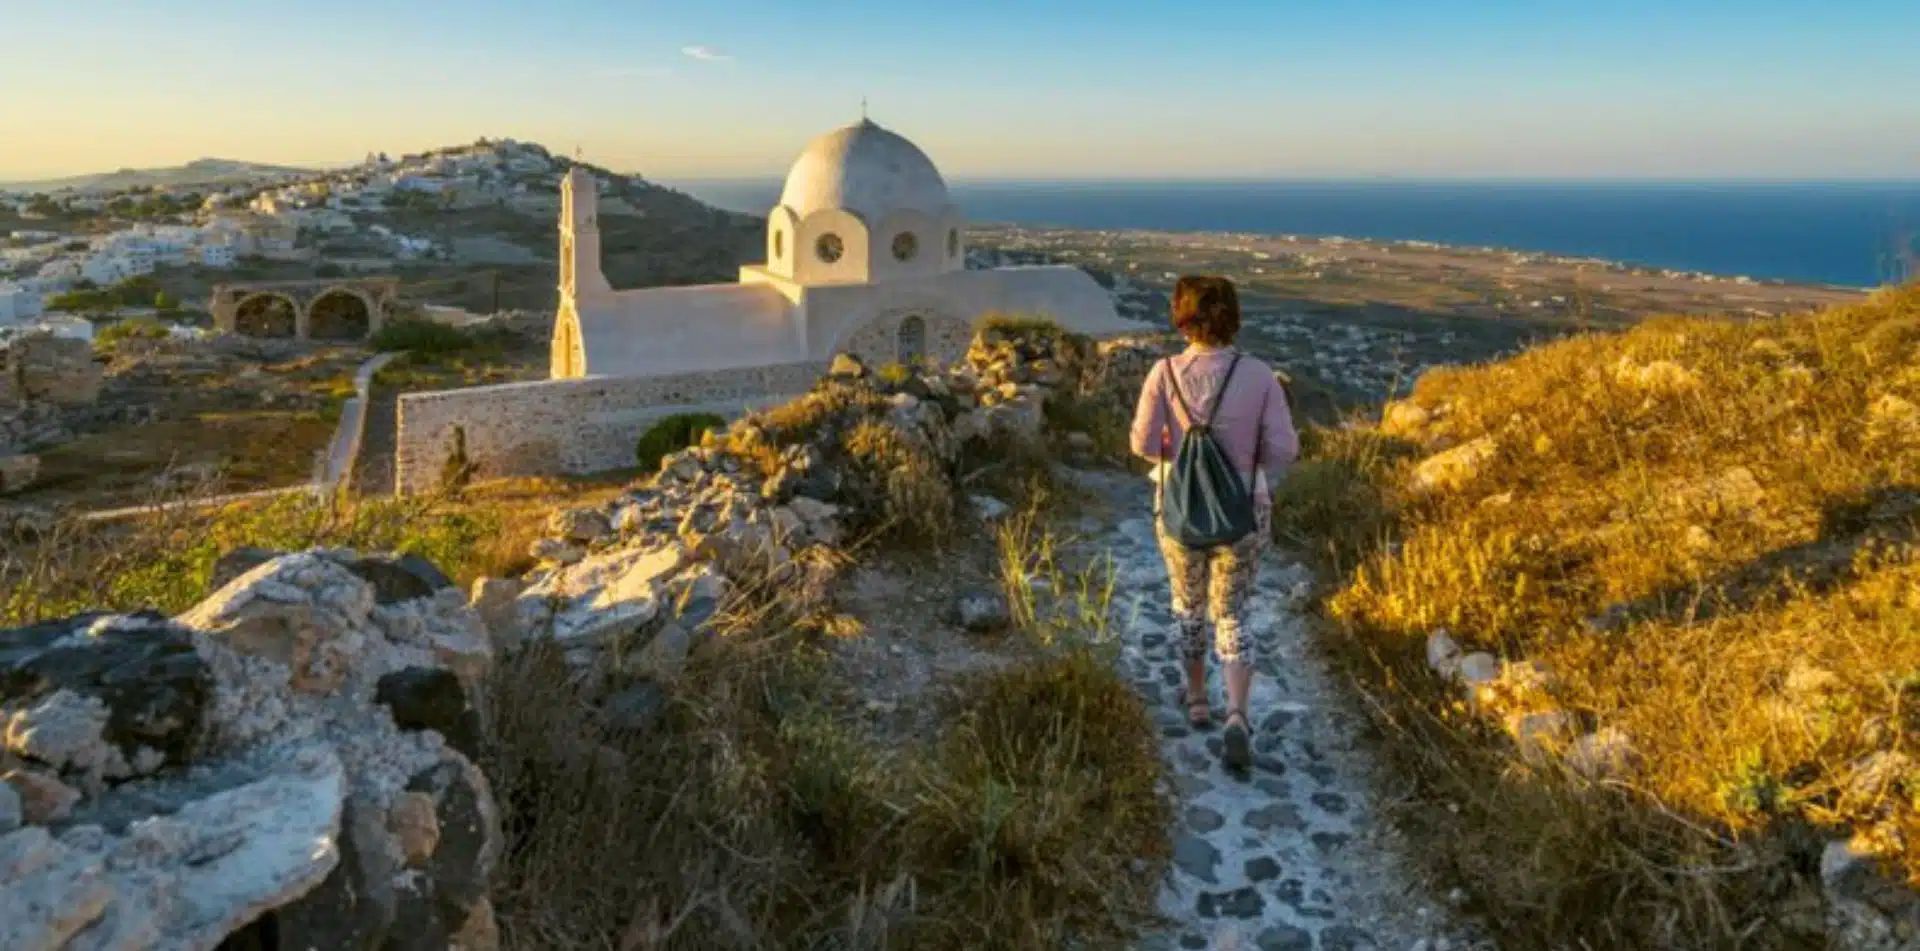 Explore the Greek Isles, on foot at eye level